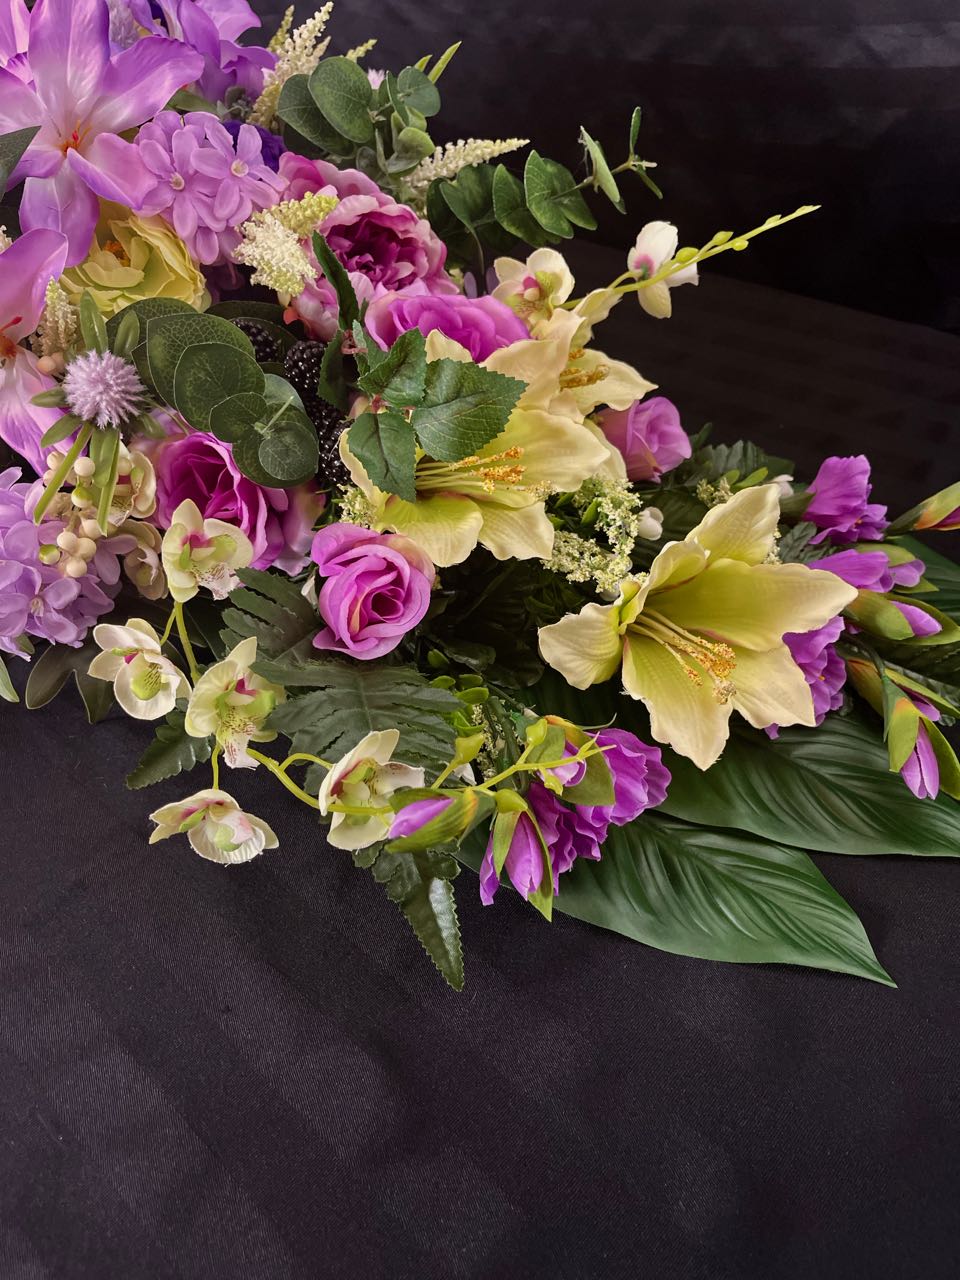 Indulge in the lushness of this vibrant floral arrangement. Deep purple and delicate mauve roses are artfully paired with subtly light lime green lilacs. Majestic purple peonies, pom pom dahlias, orchids, and lilies coalesce to create a stunning vision. This design measures four feet long and 16 inches wide, elevated upon glossy hunter green palm leaves.